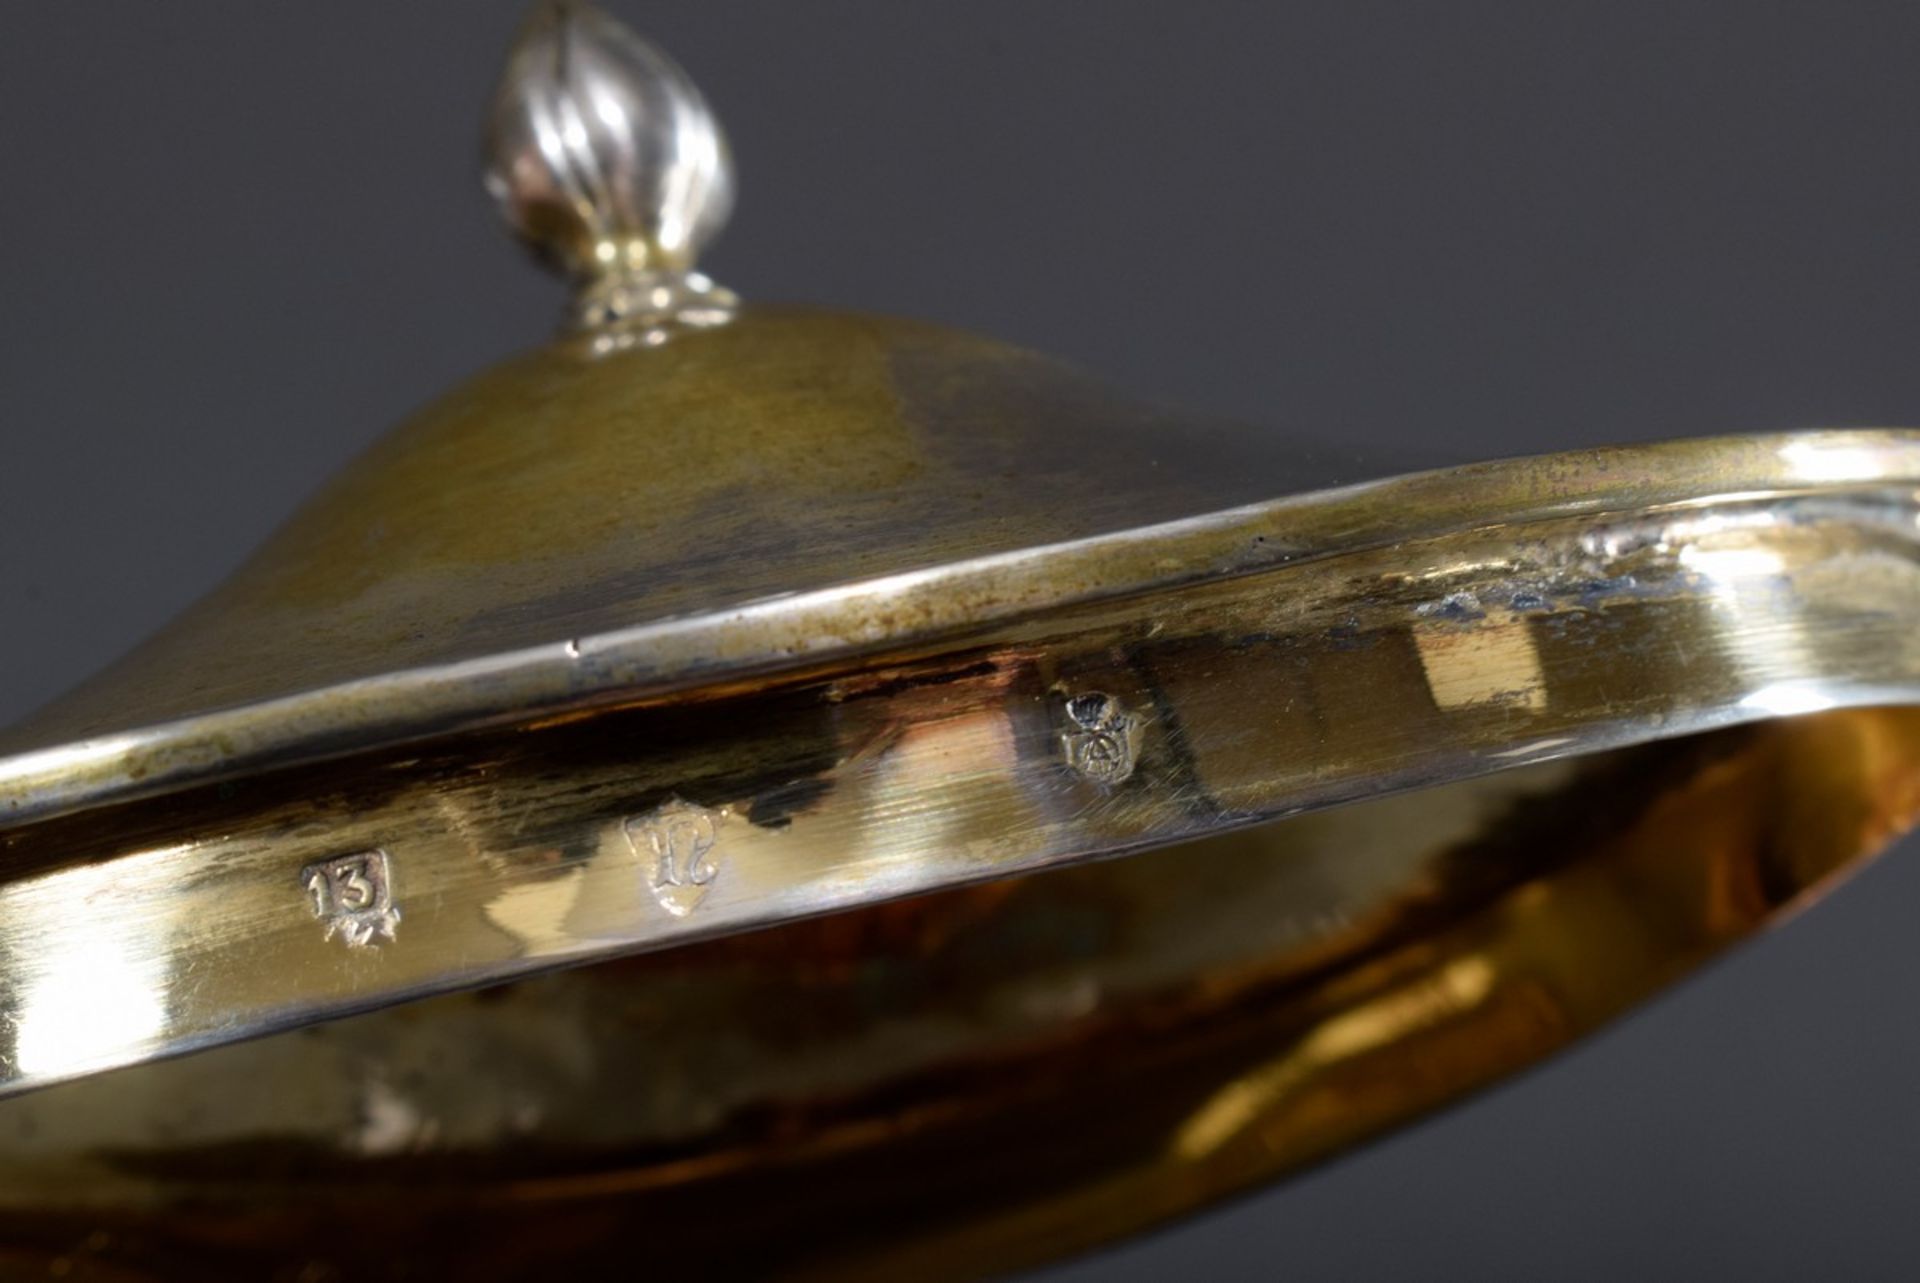 Empire façon lidded bowl with serpentine handles on the sides and openwork foot, B. Neresheimer & S - Image 6 of 6